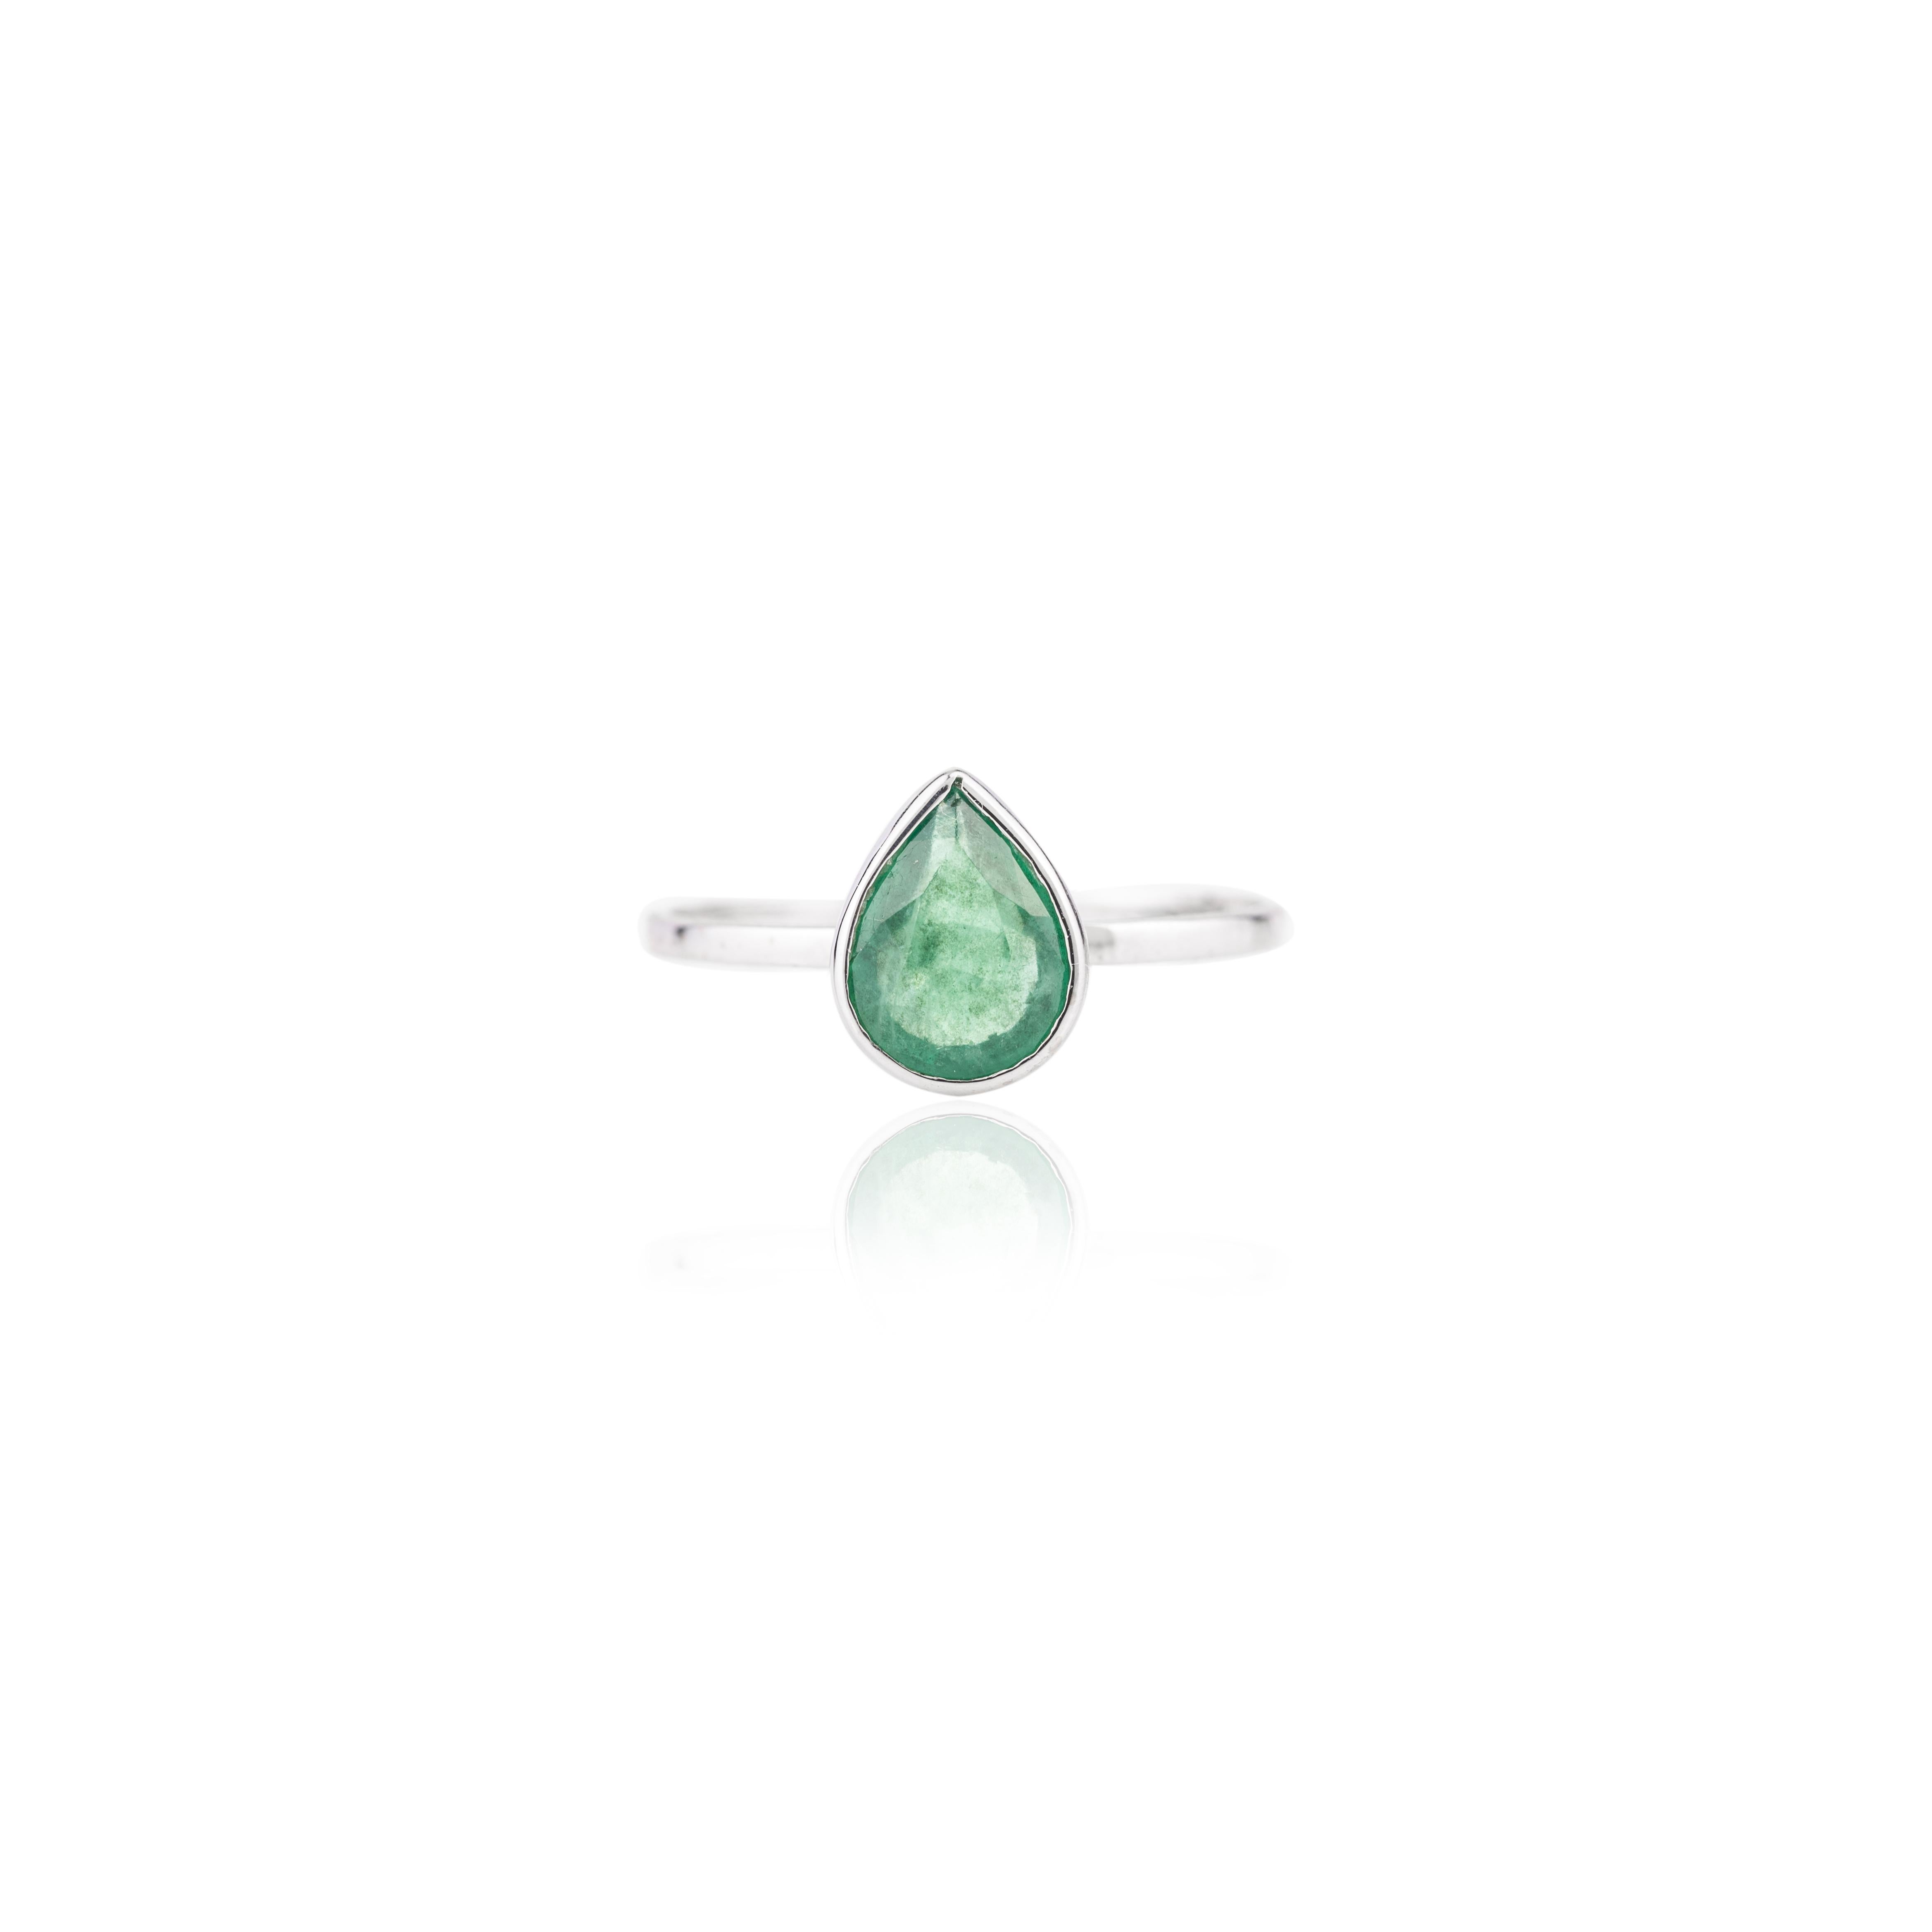 For Sale:  Natural Pear Cut Emerald Birthstone Ring Bezel Set in 18k White Gold Settings 3